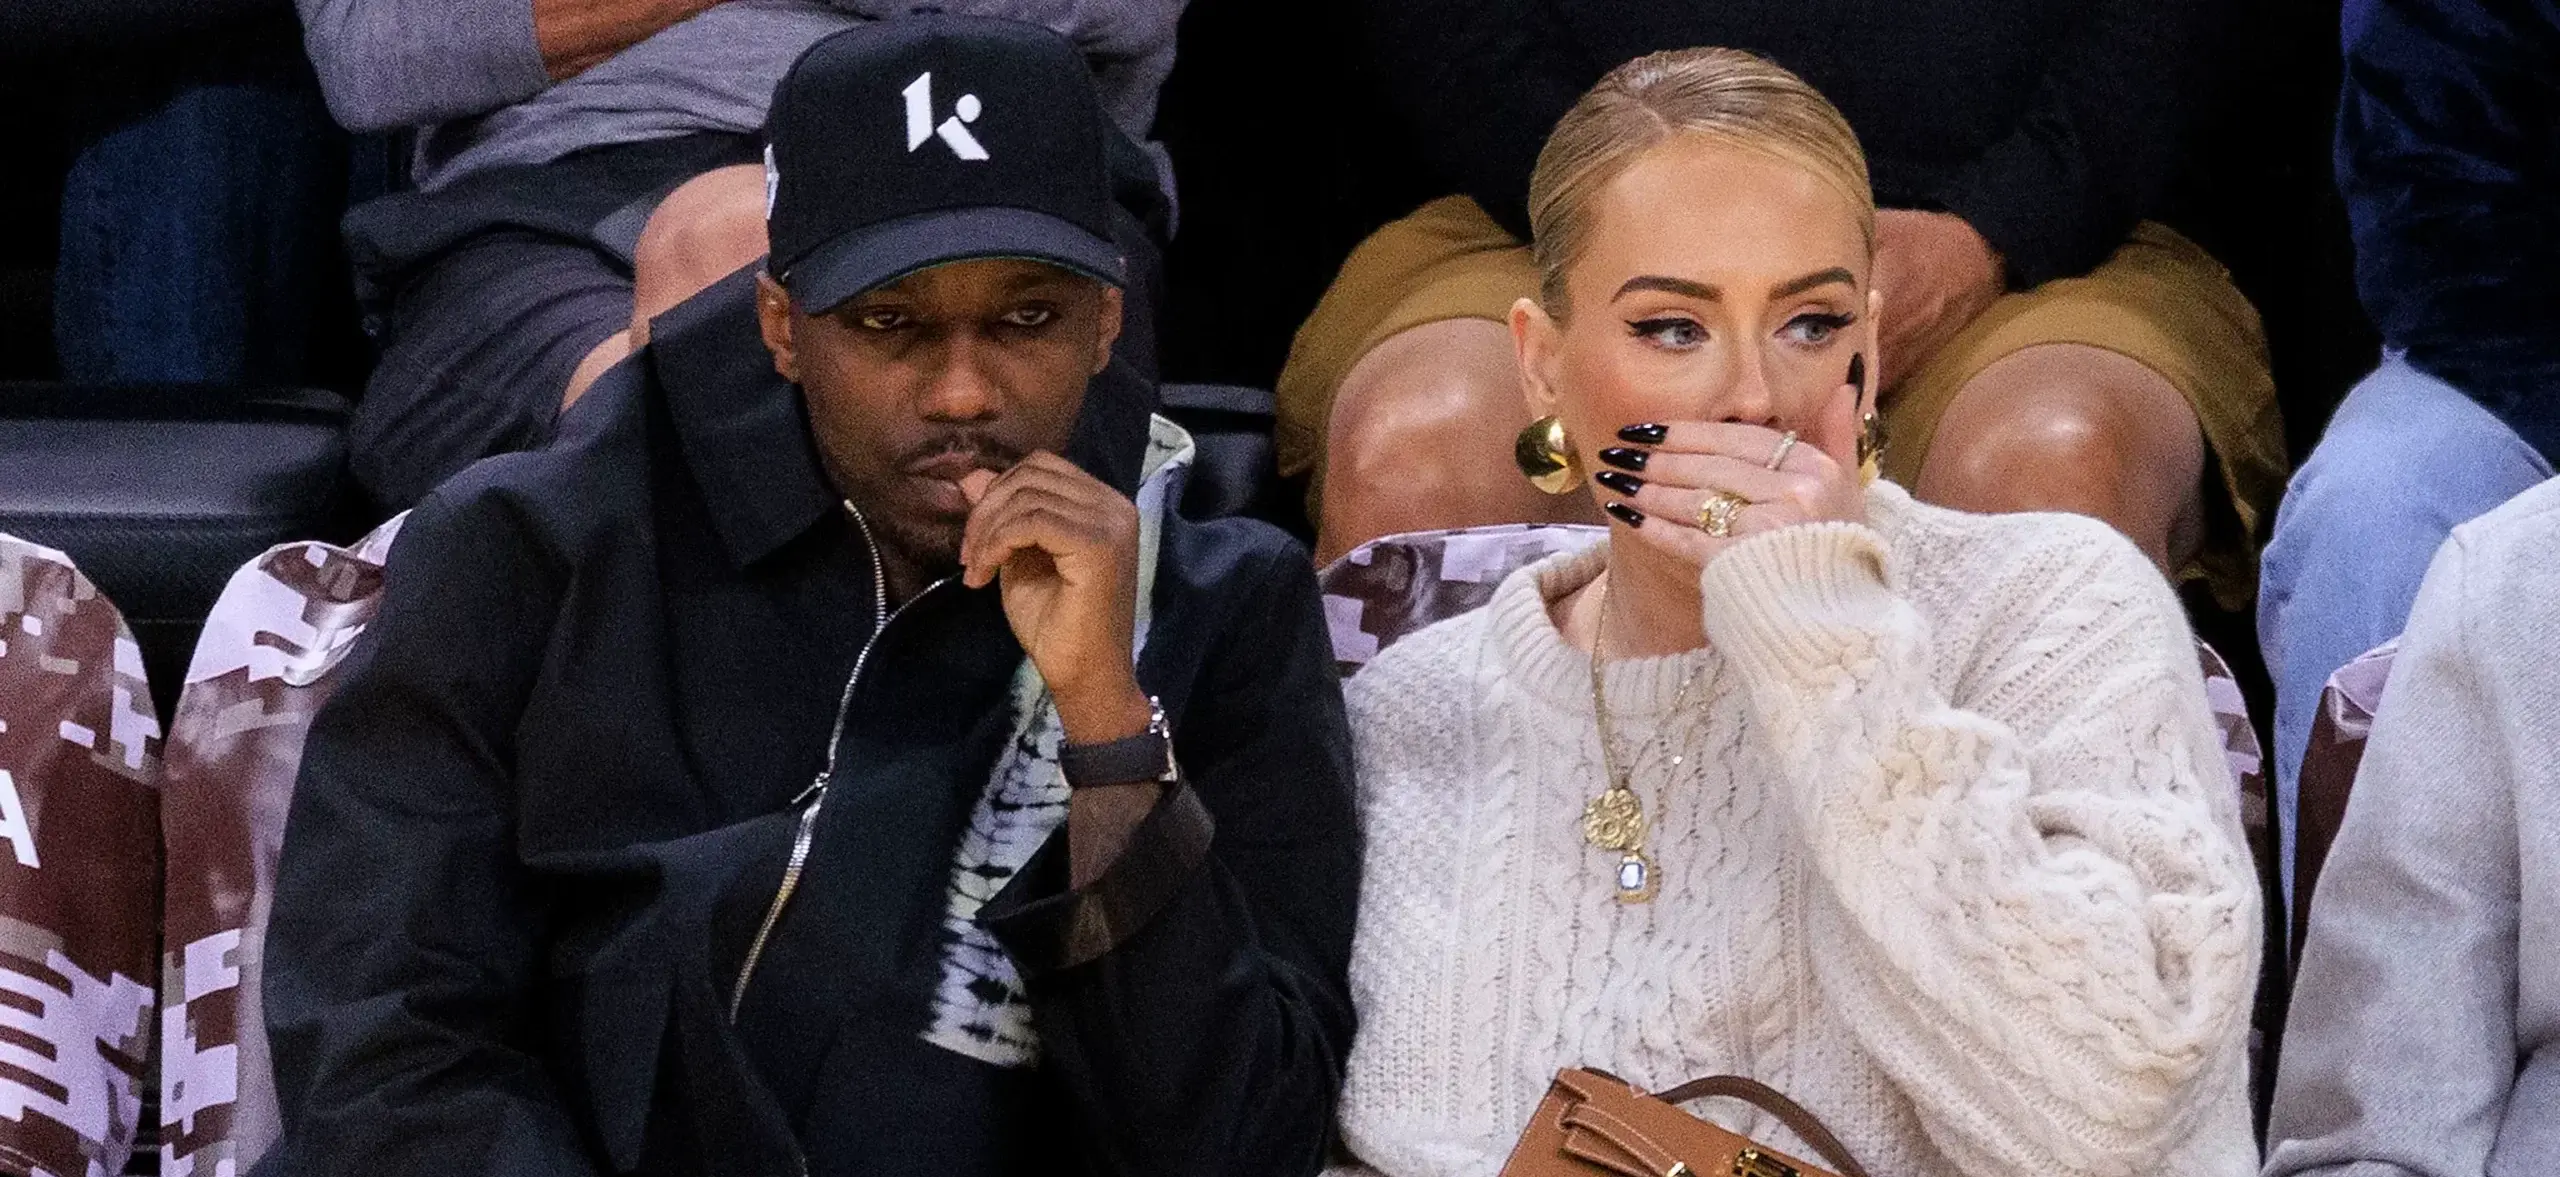 Adele's Relationship With Rich Paul Reportedly 'Solid' As She Marks Her 36th Birthday